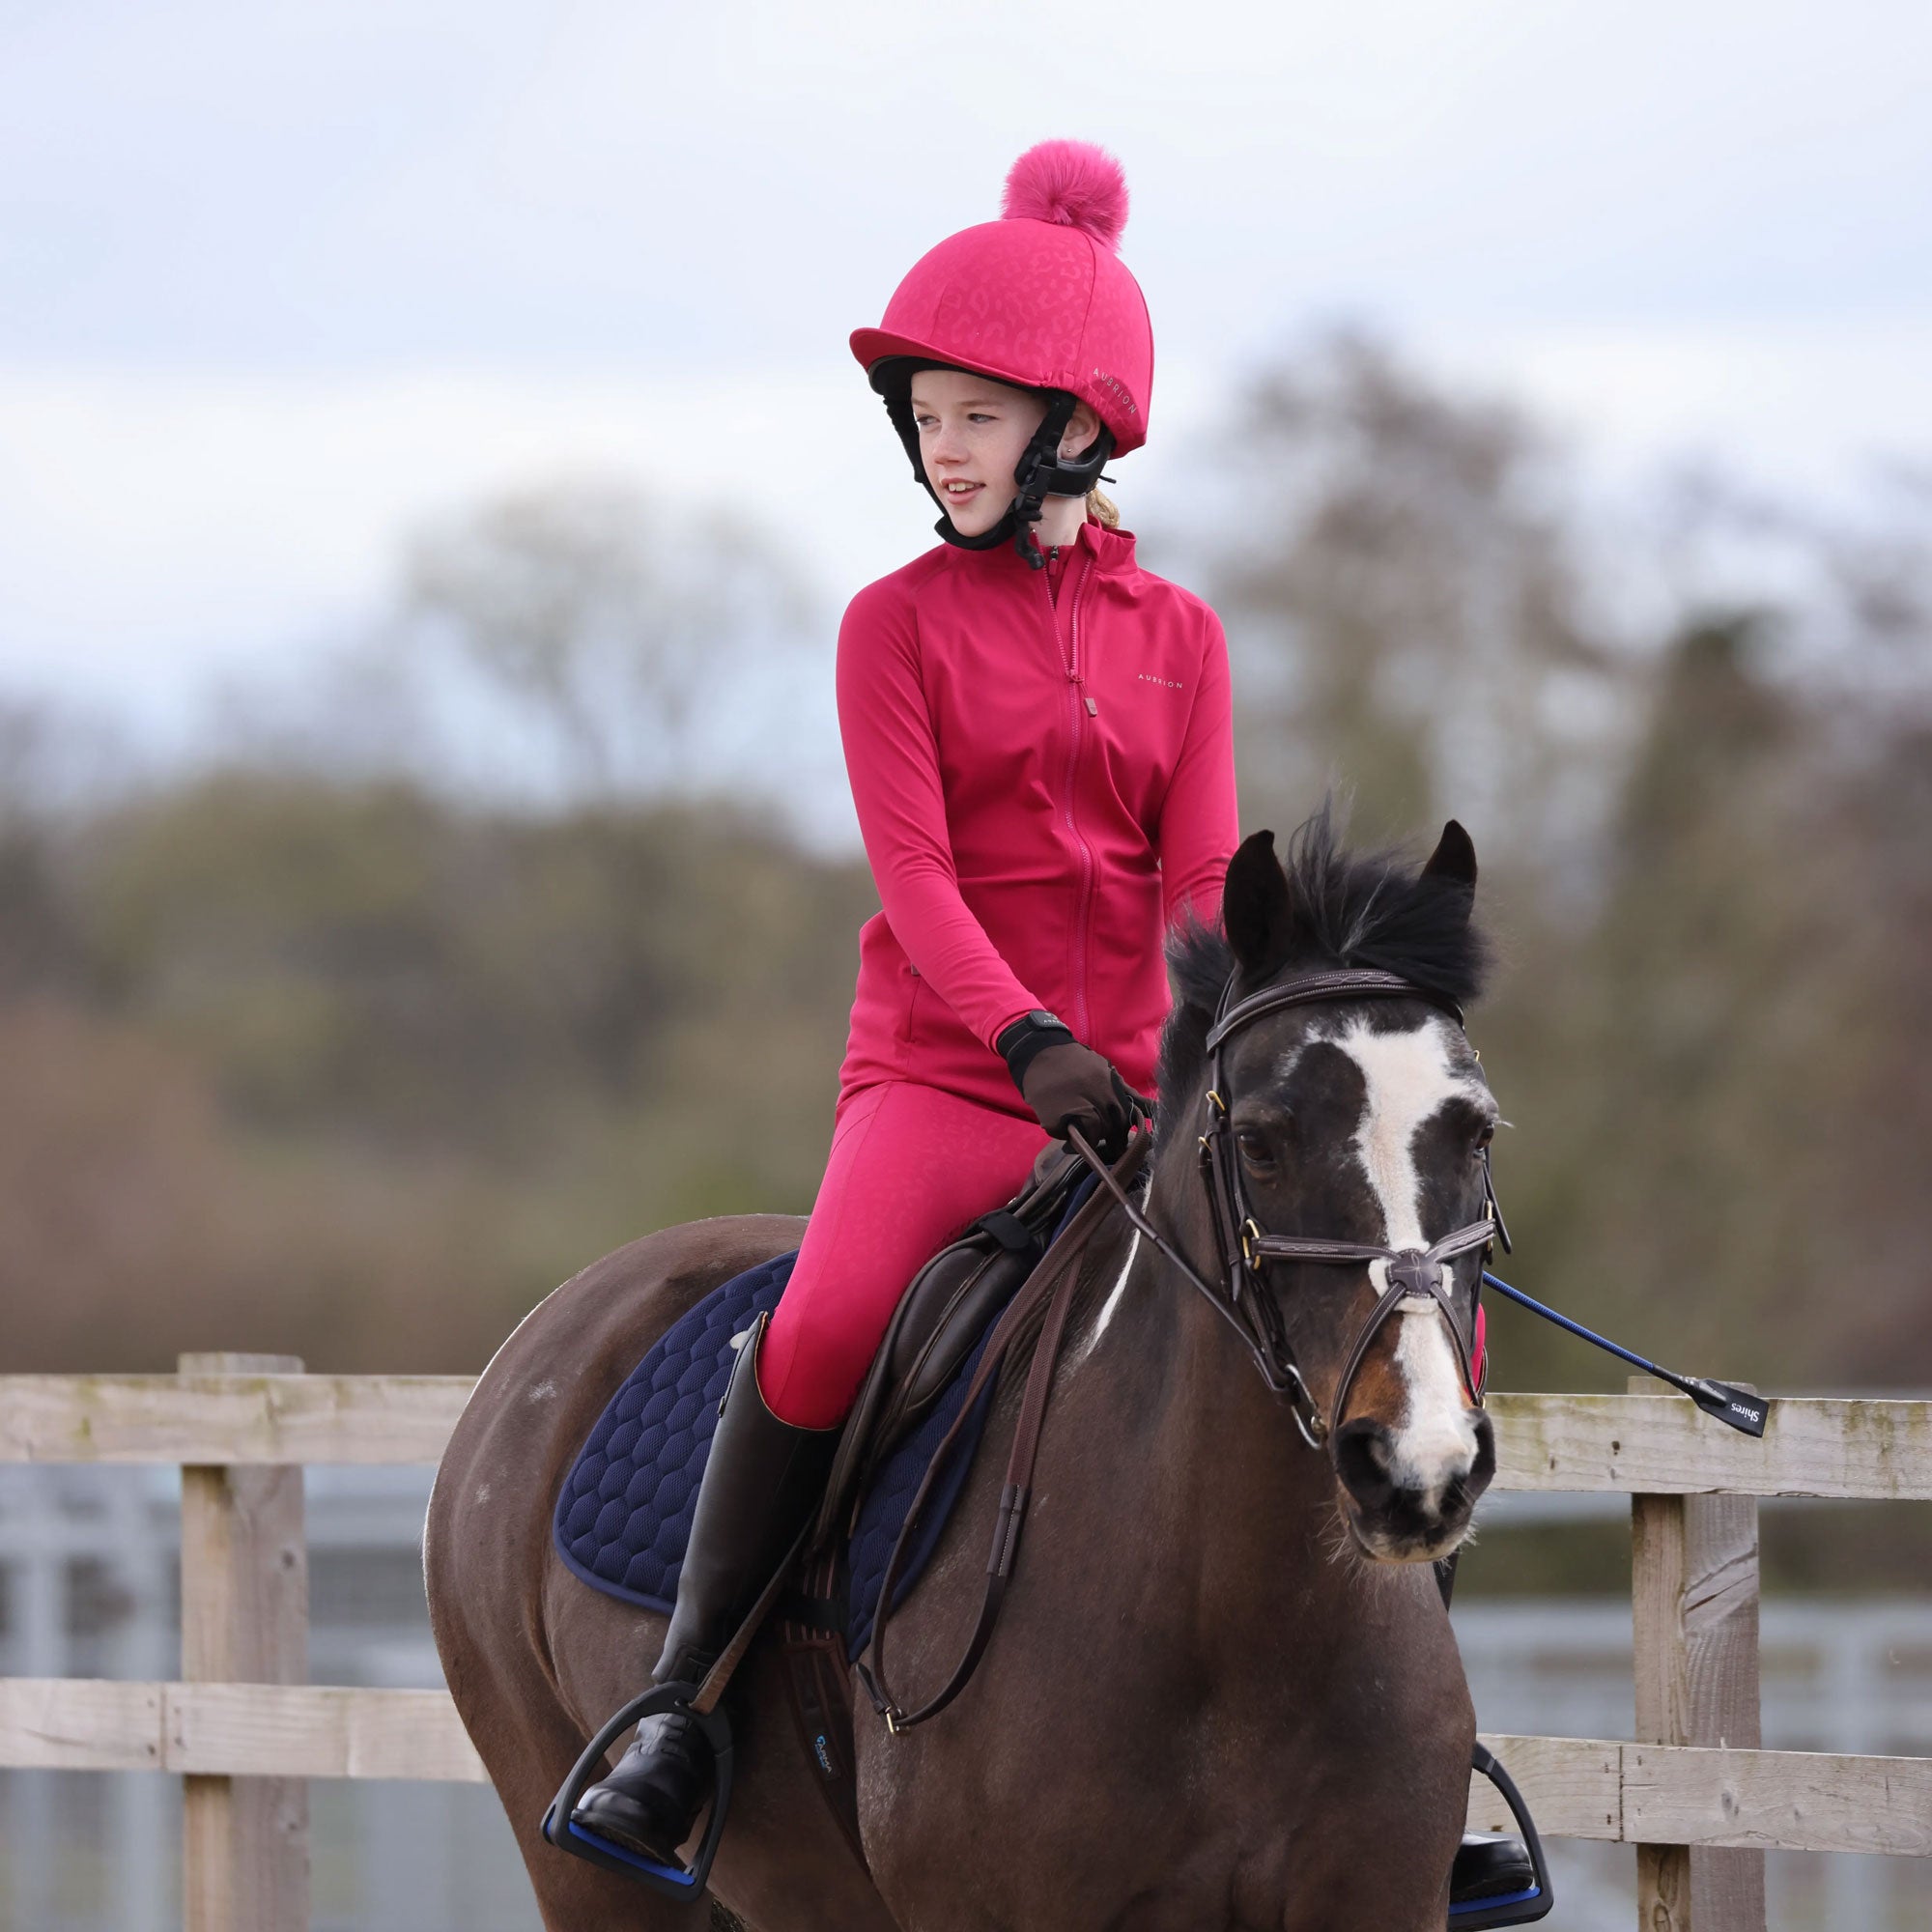 How to Dress Your Child for an English Horse Show